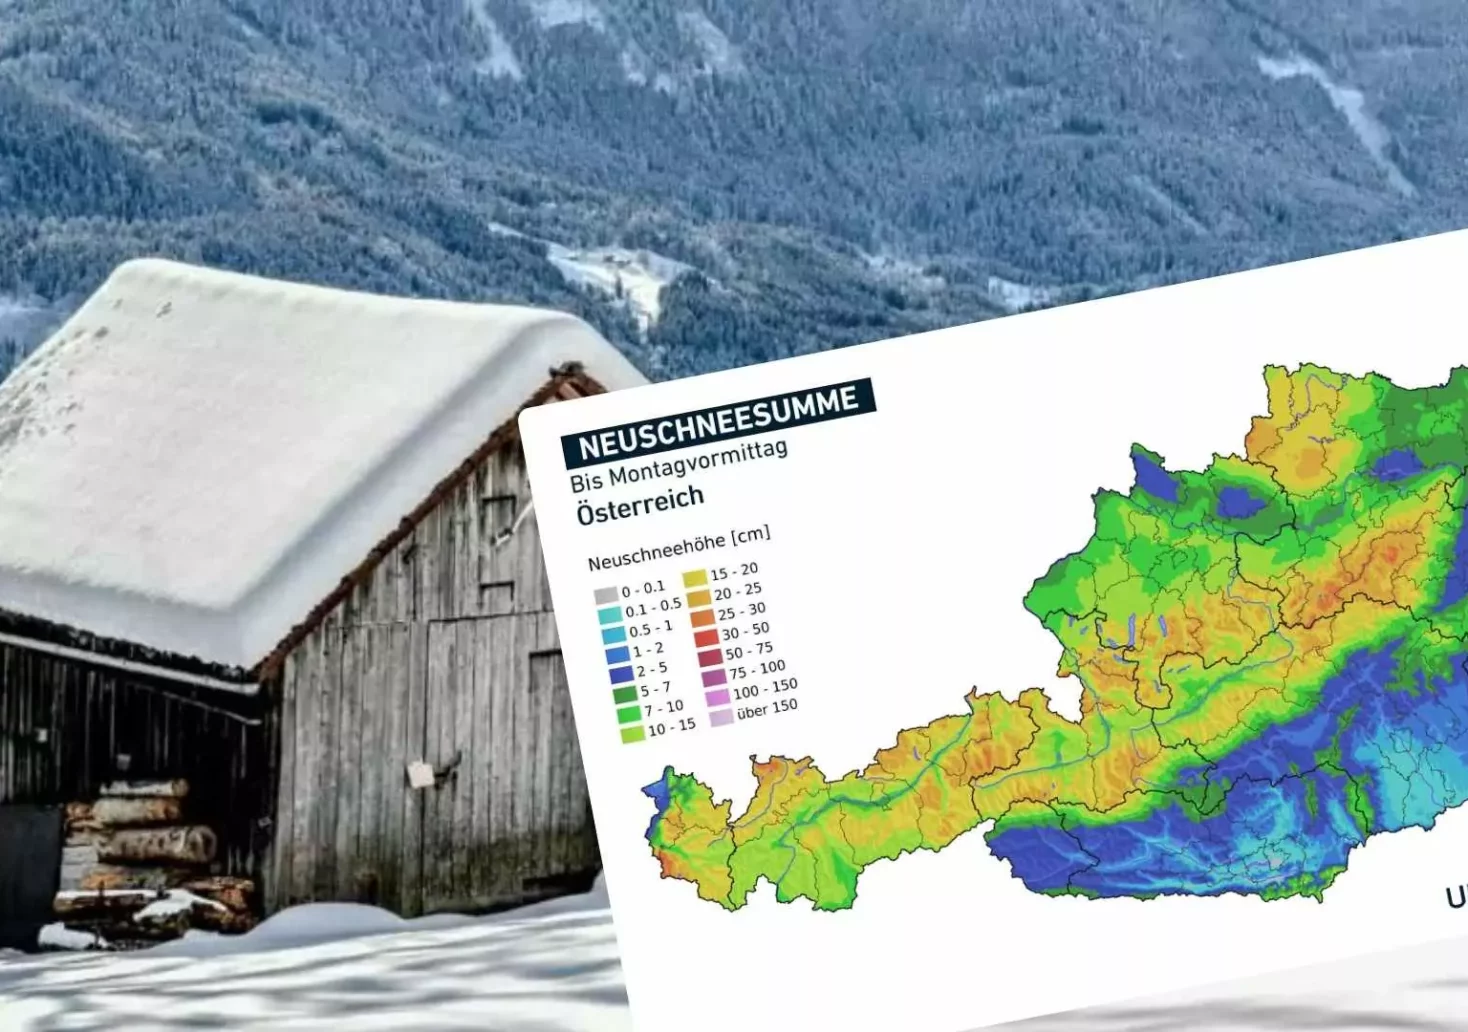 Photo in the article from 5min.at: You can see the amount of snow expected in Austria in the coming hours.